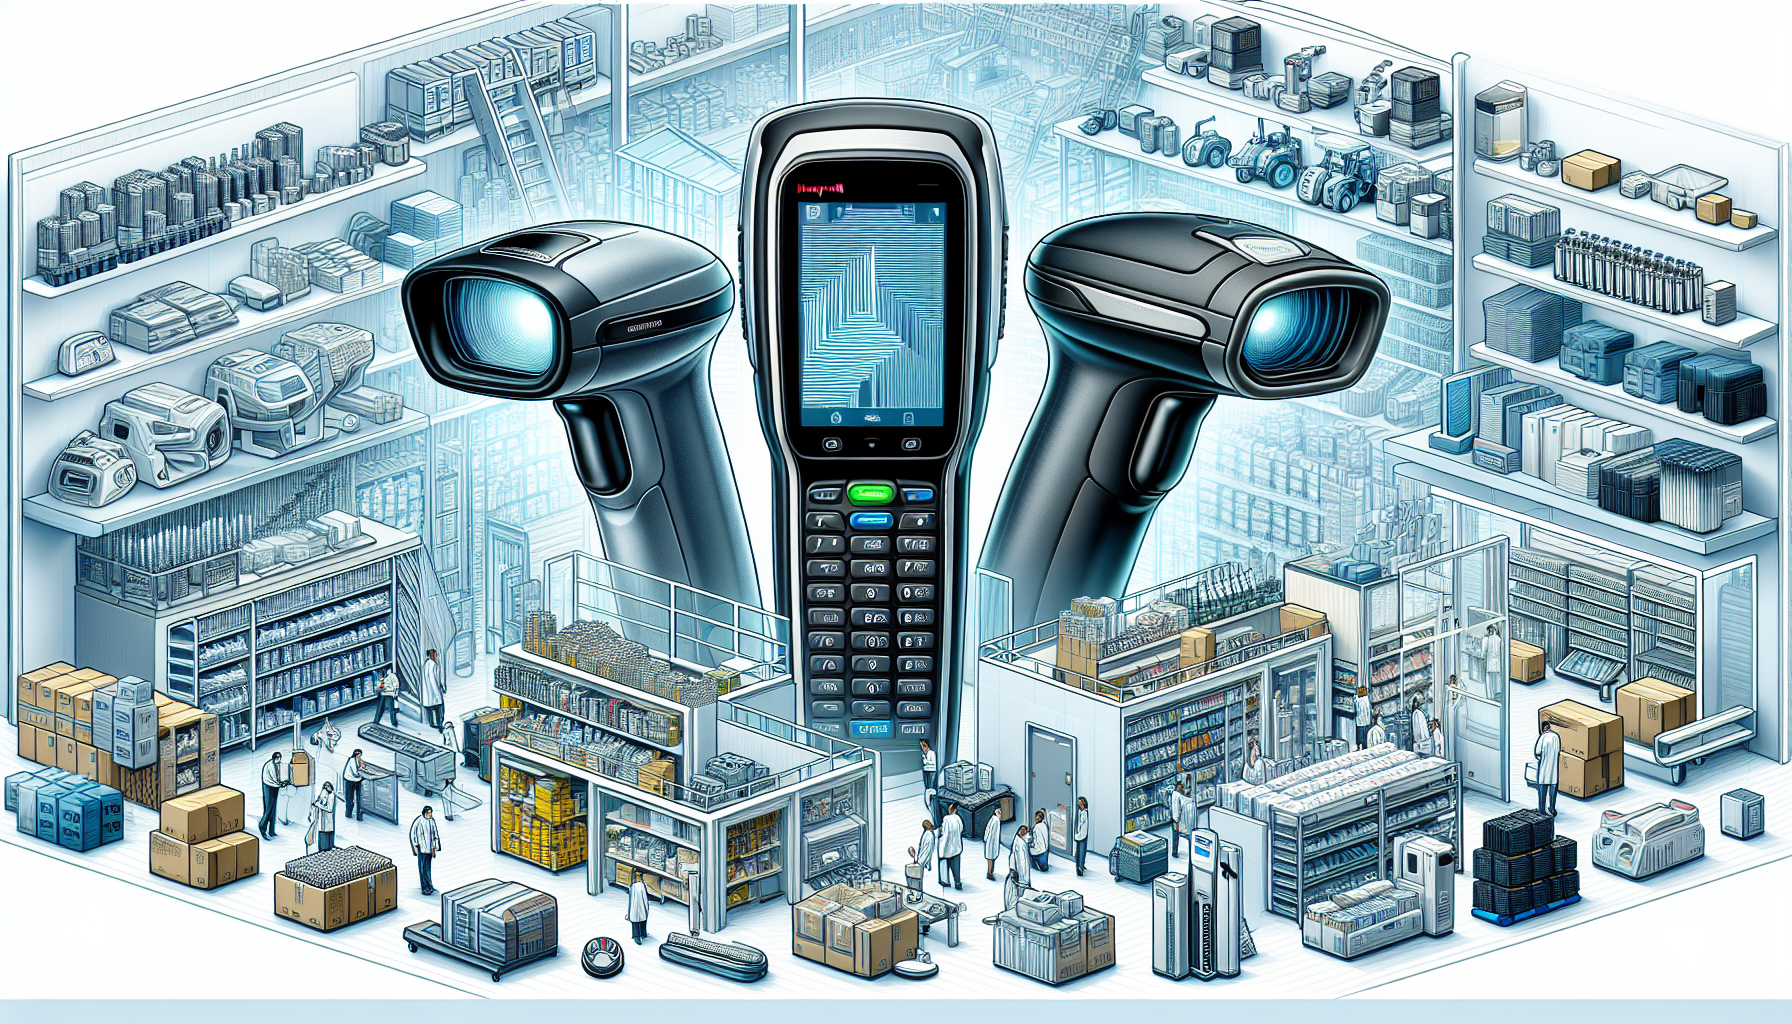 Illustration of various Honeywell barcode scanner models for different industries